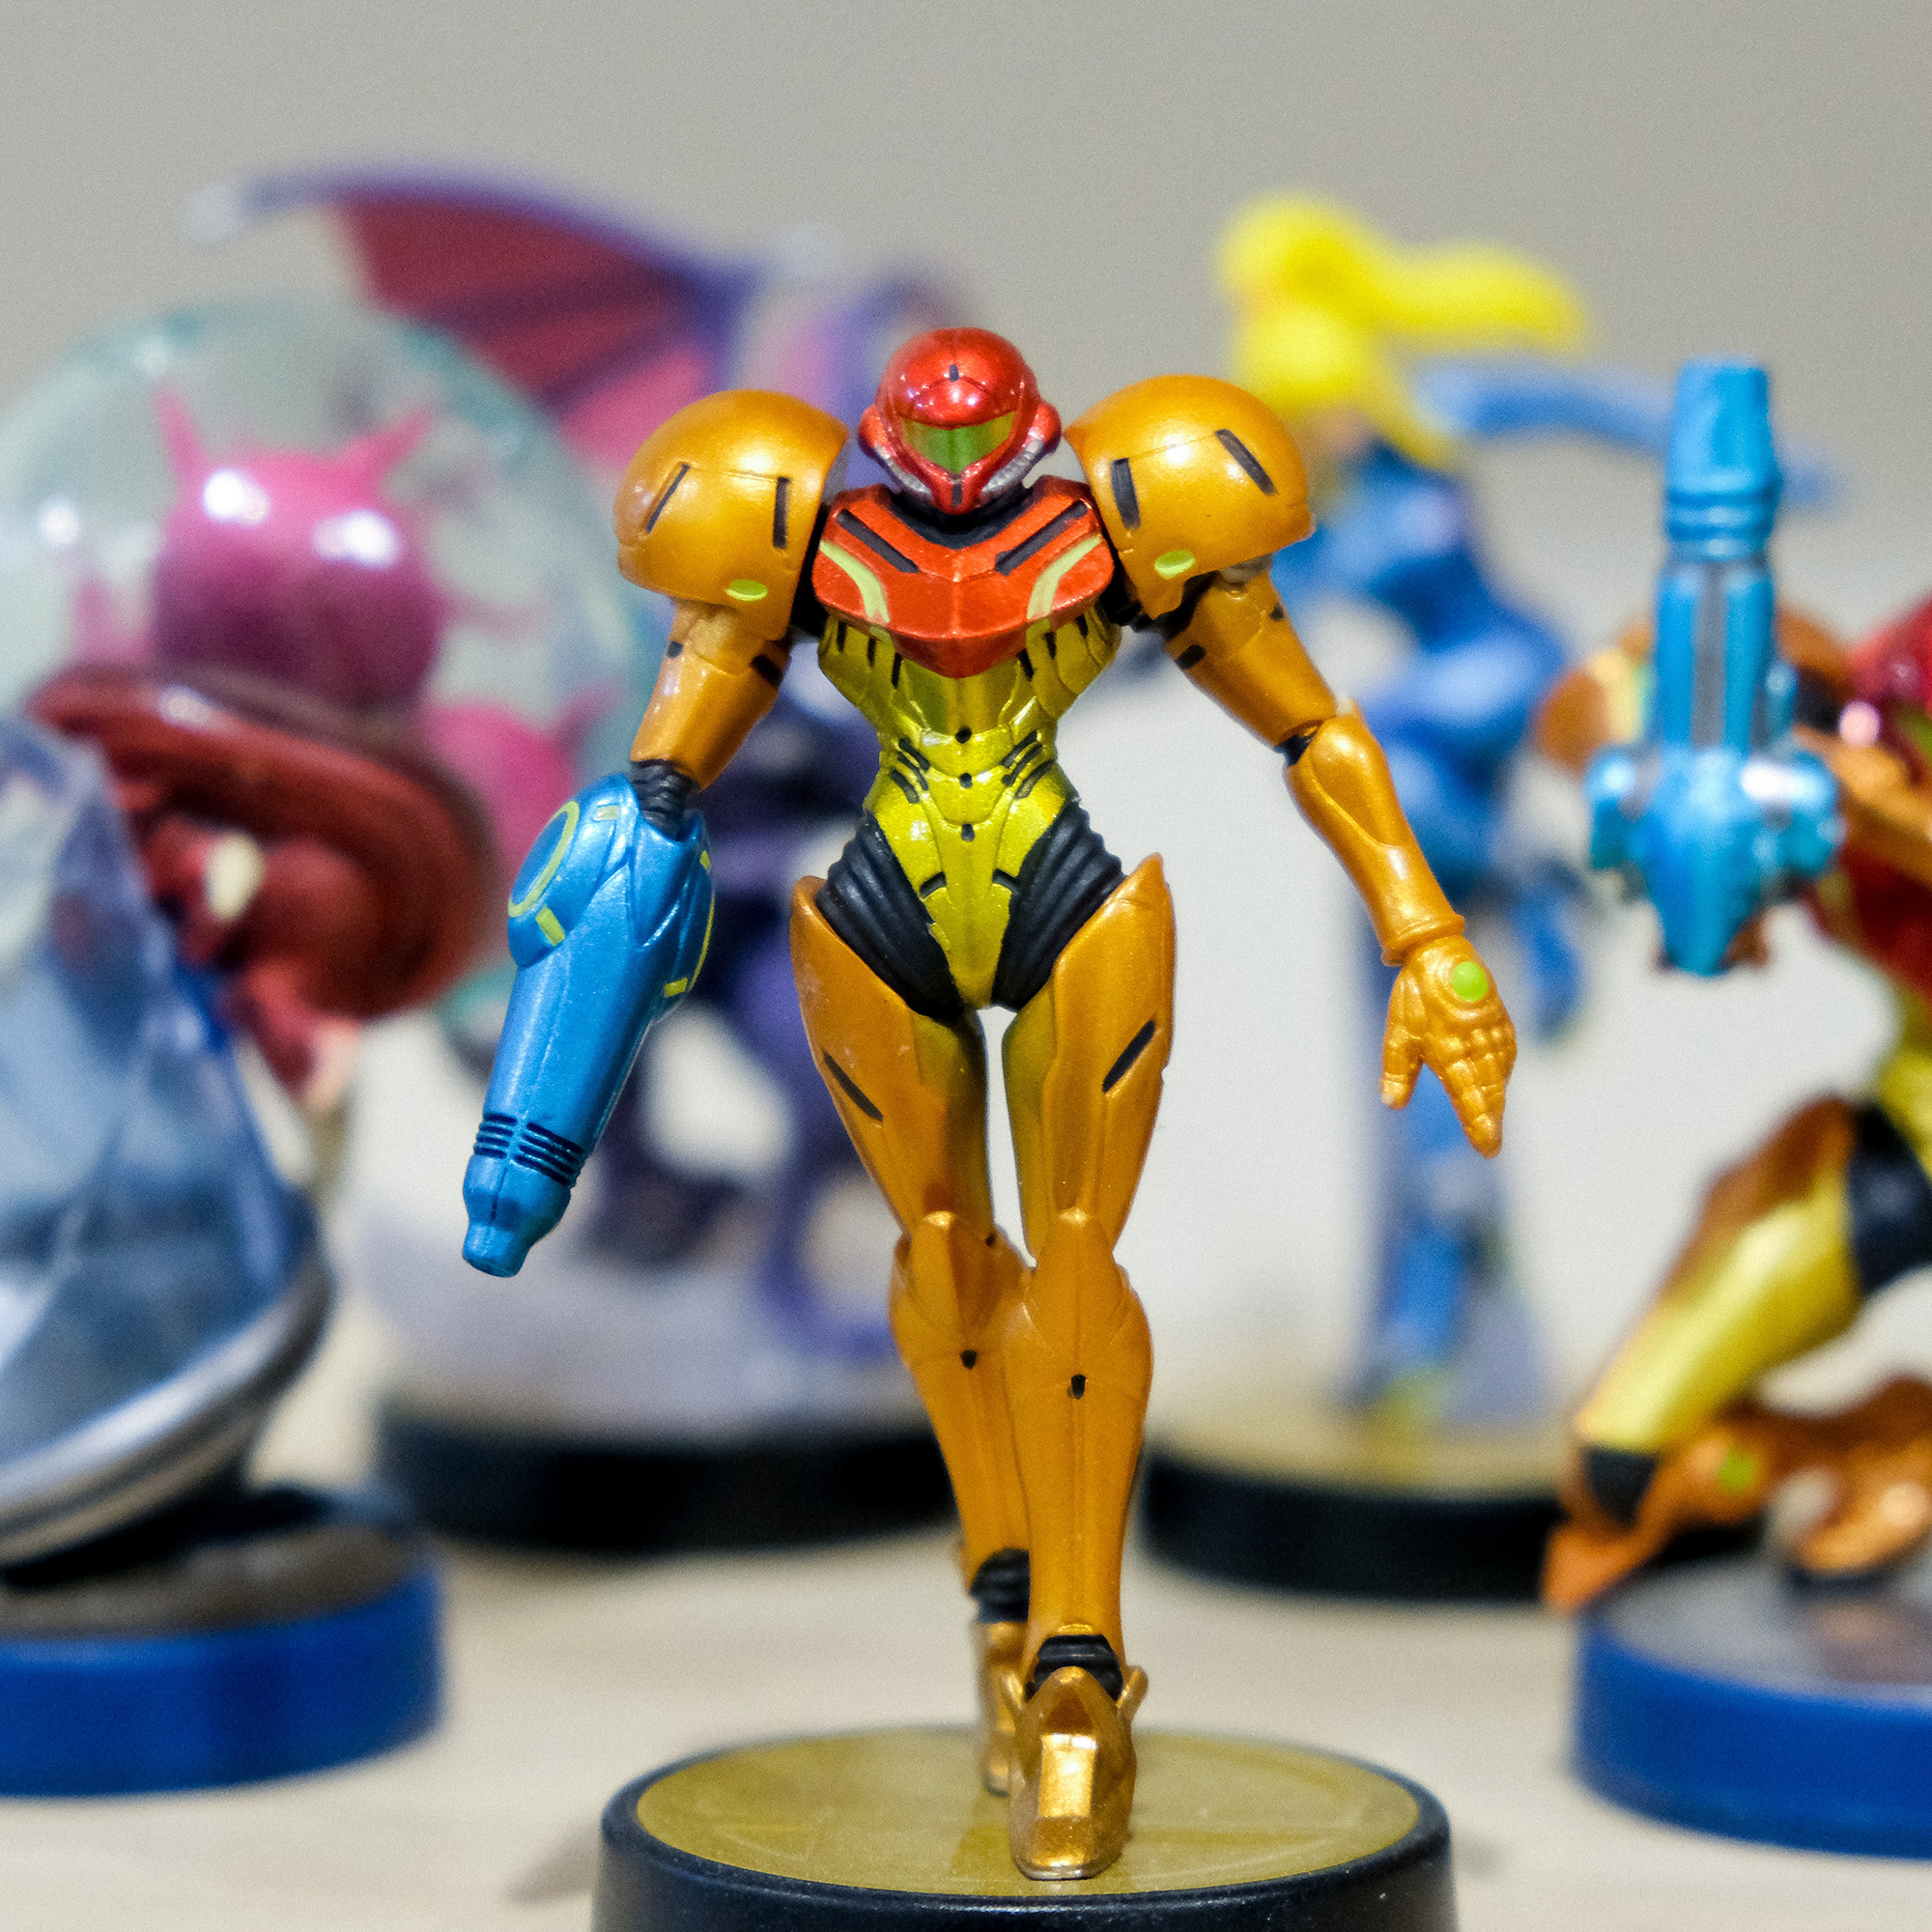 The character Samus Aran from the game "Metroid." | Source: Unsplash